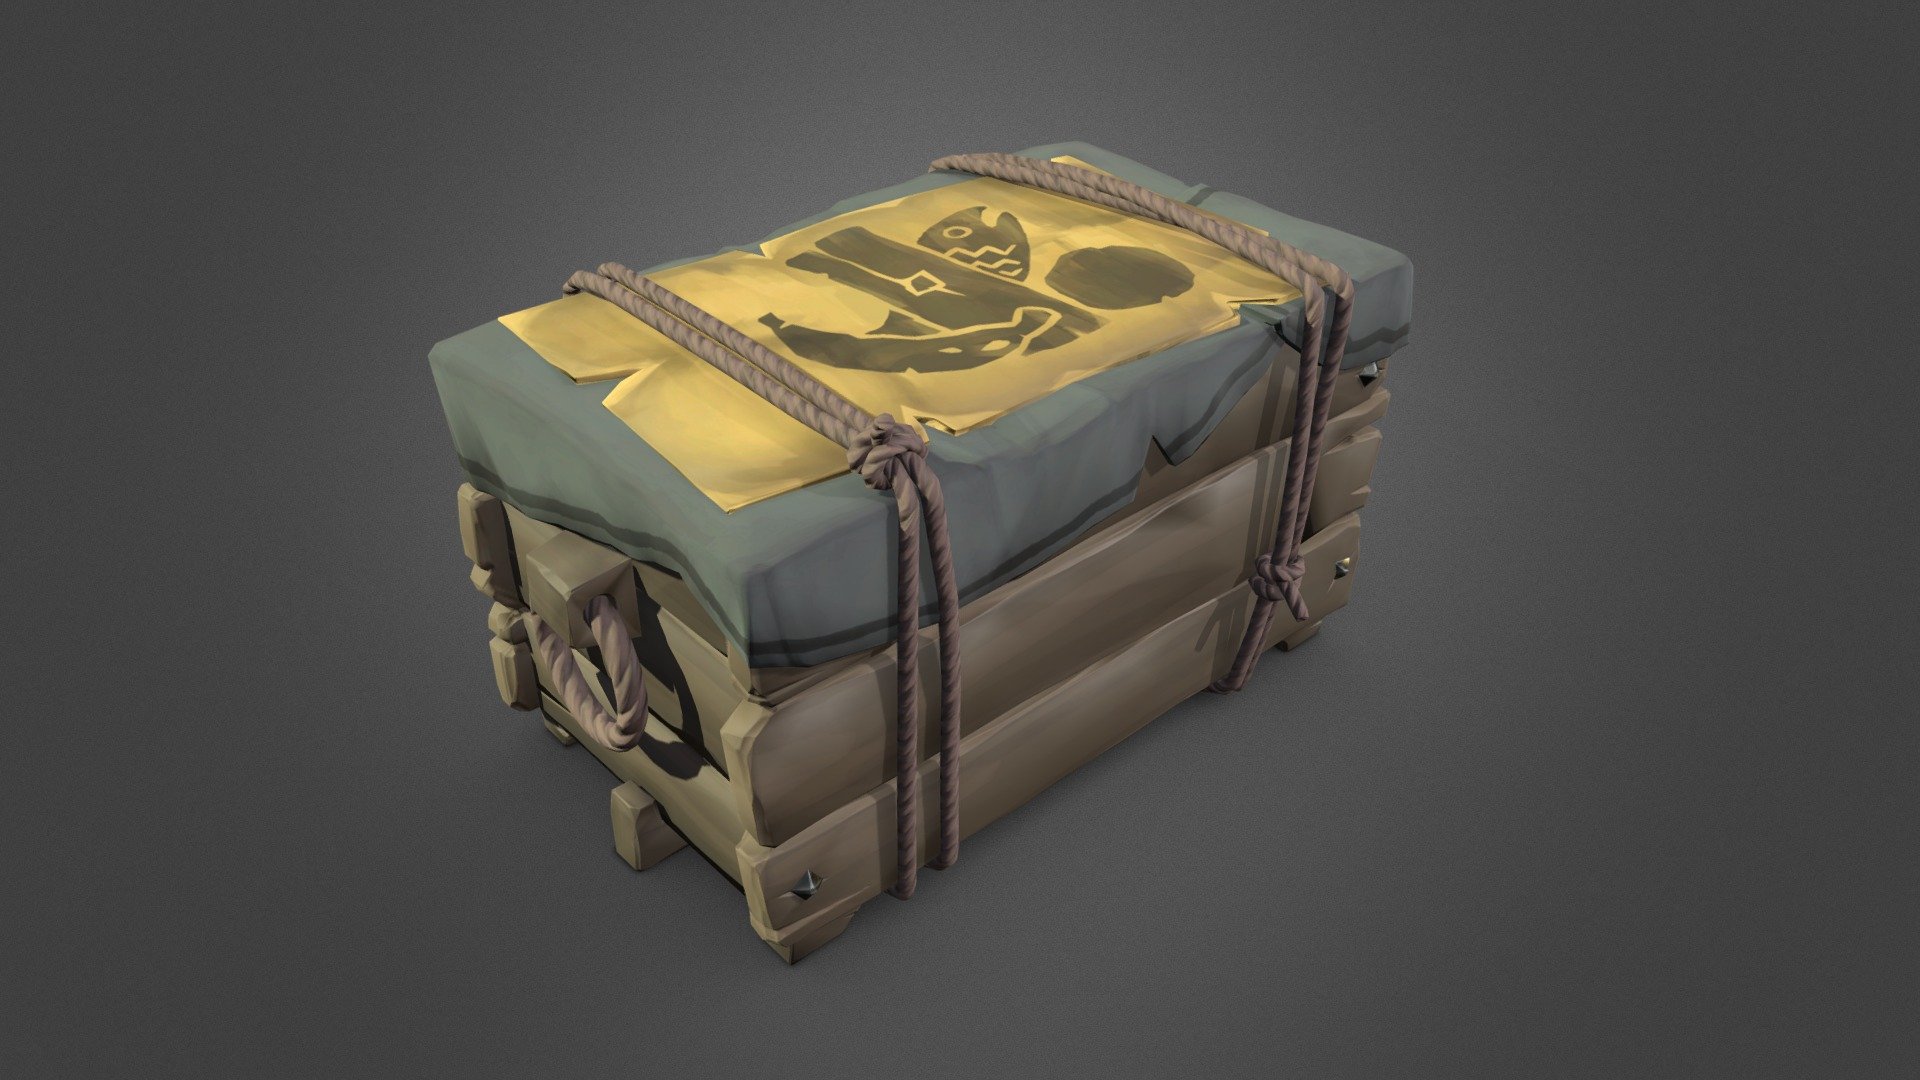 Wiki of this object:
https://seaofthieves.fandom.com/wiki/Storage_Crate



Sea of Thieves is a trademark of the Microsoft group of companies.
All trademarks and copyrights are property of their respective owners 3d model